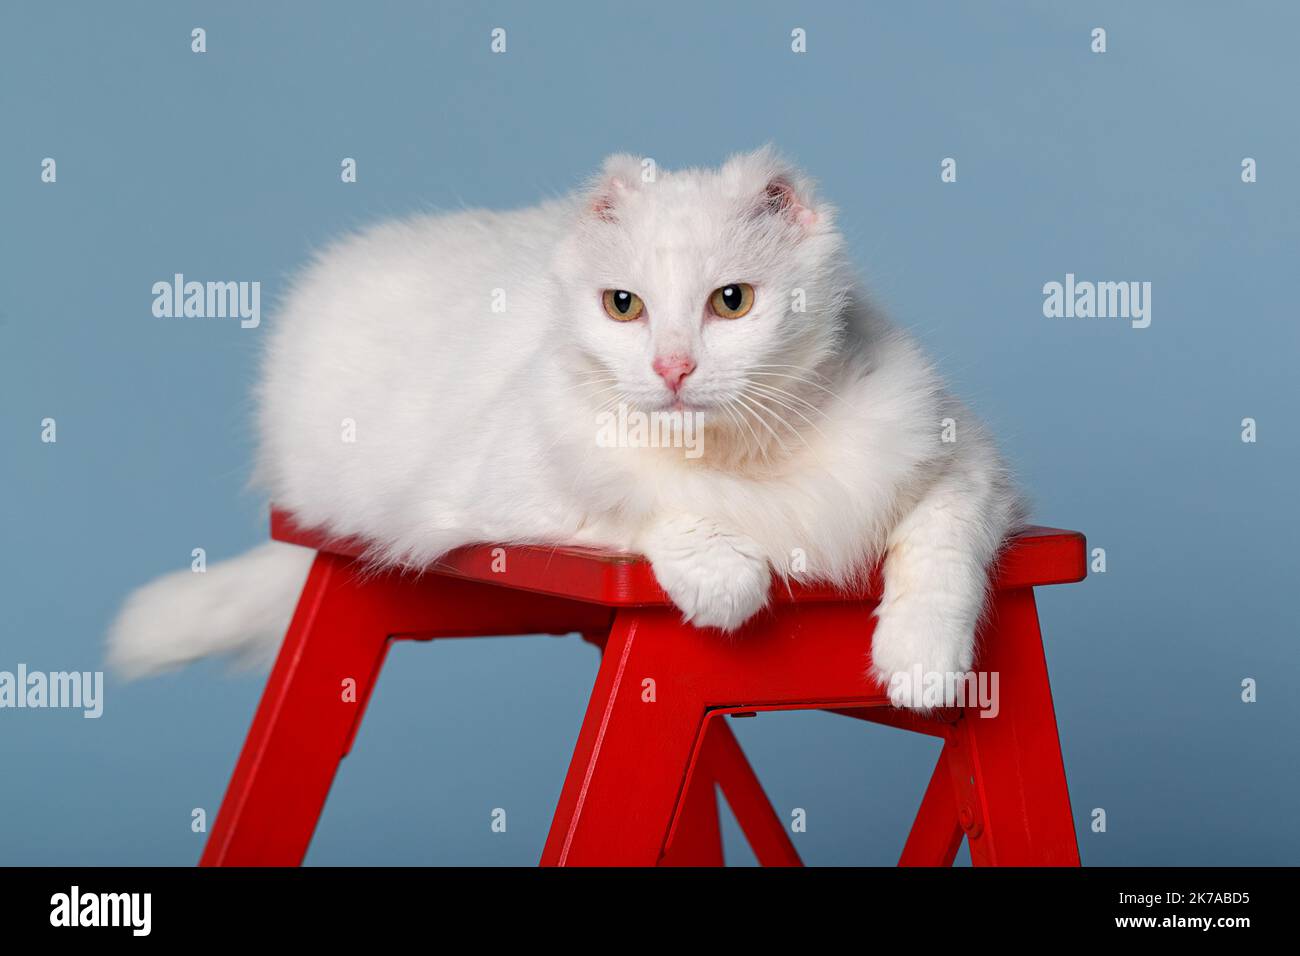 A fluffy white cat is resting on a red stepladder. A special cat with amputated ears, she defeated cancer and found a family. Stock Photo